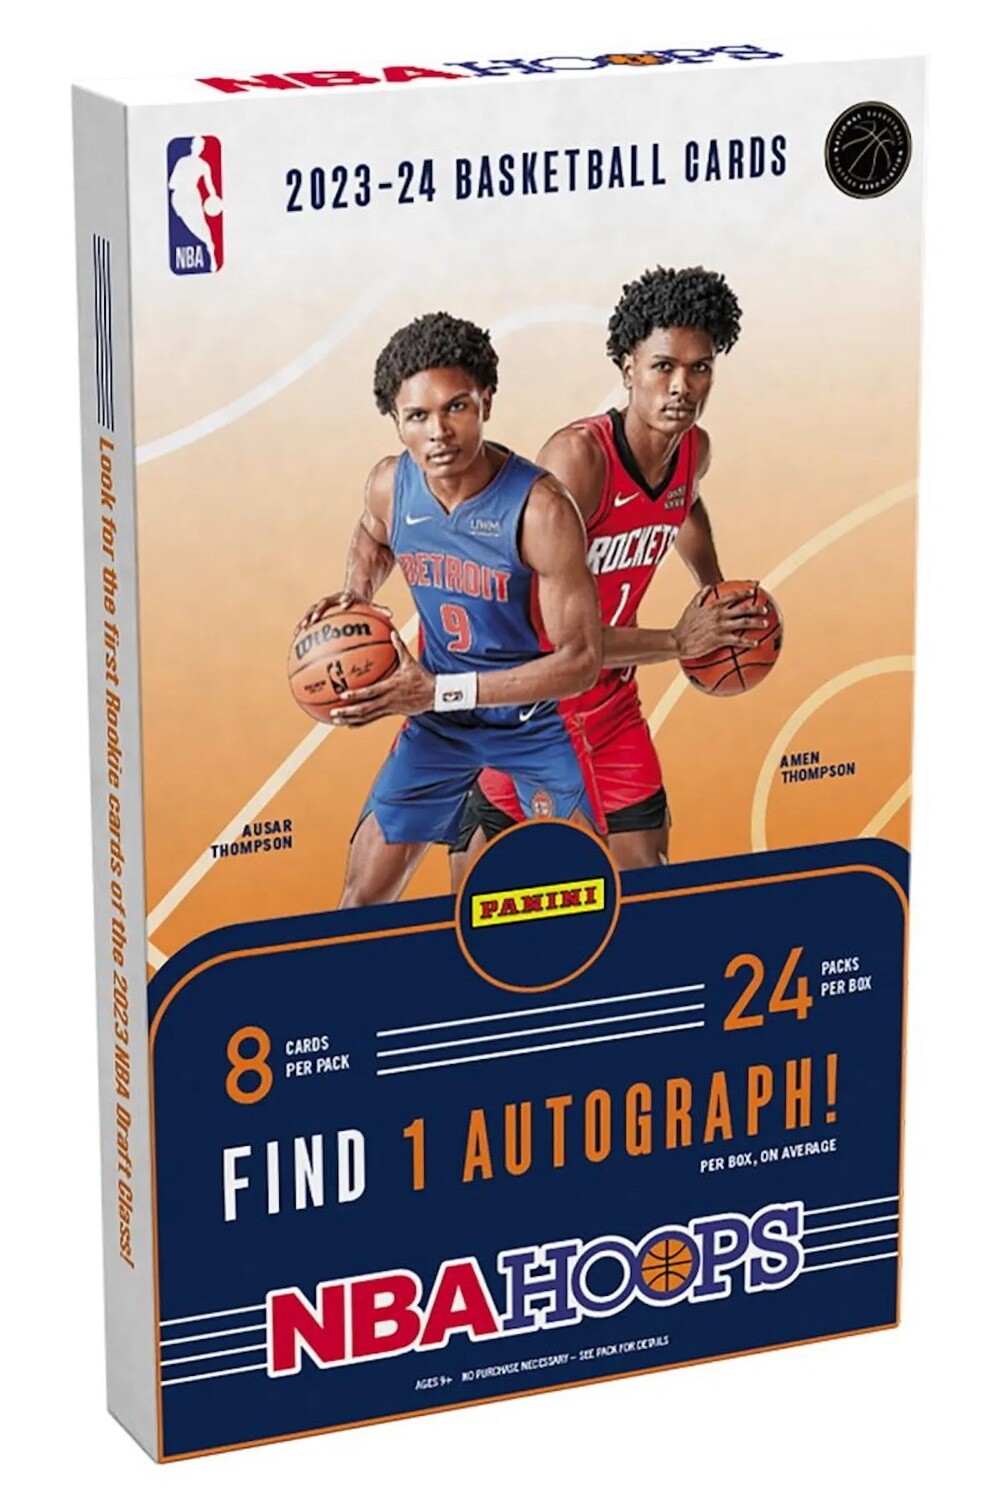 2023/24 Panini Hoops Basketball Hobby Box (sold out!)